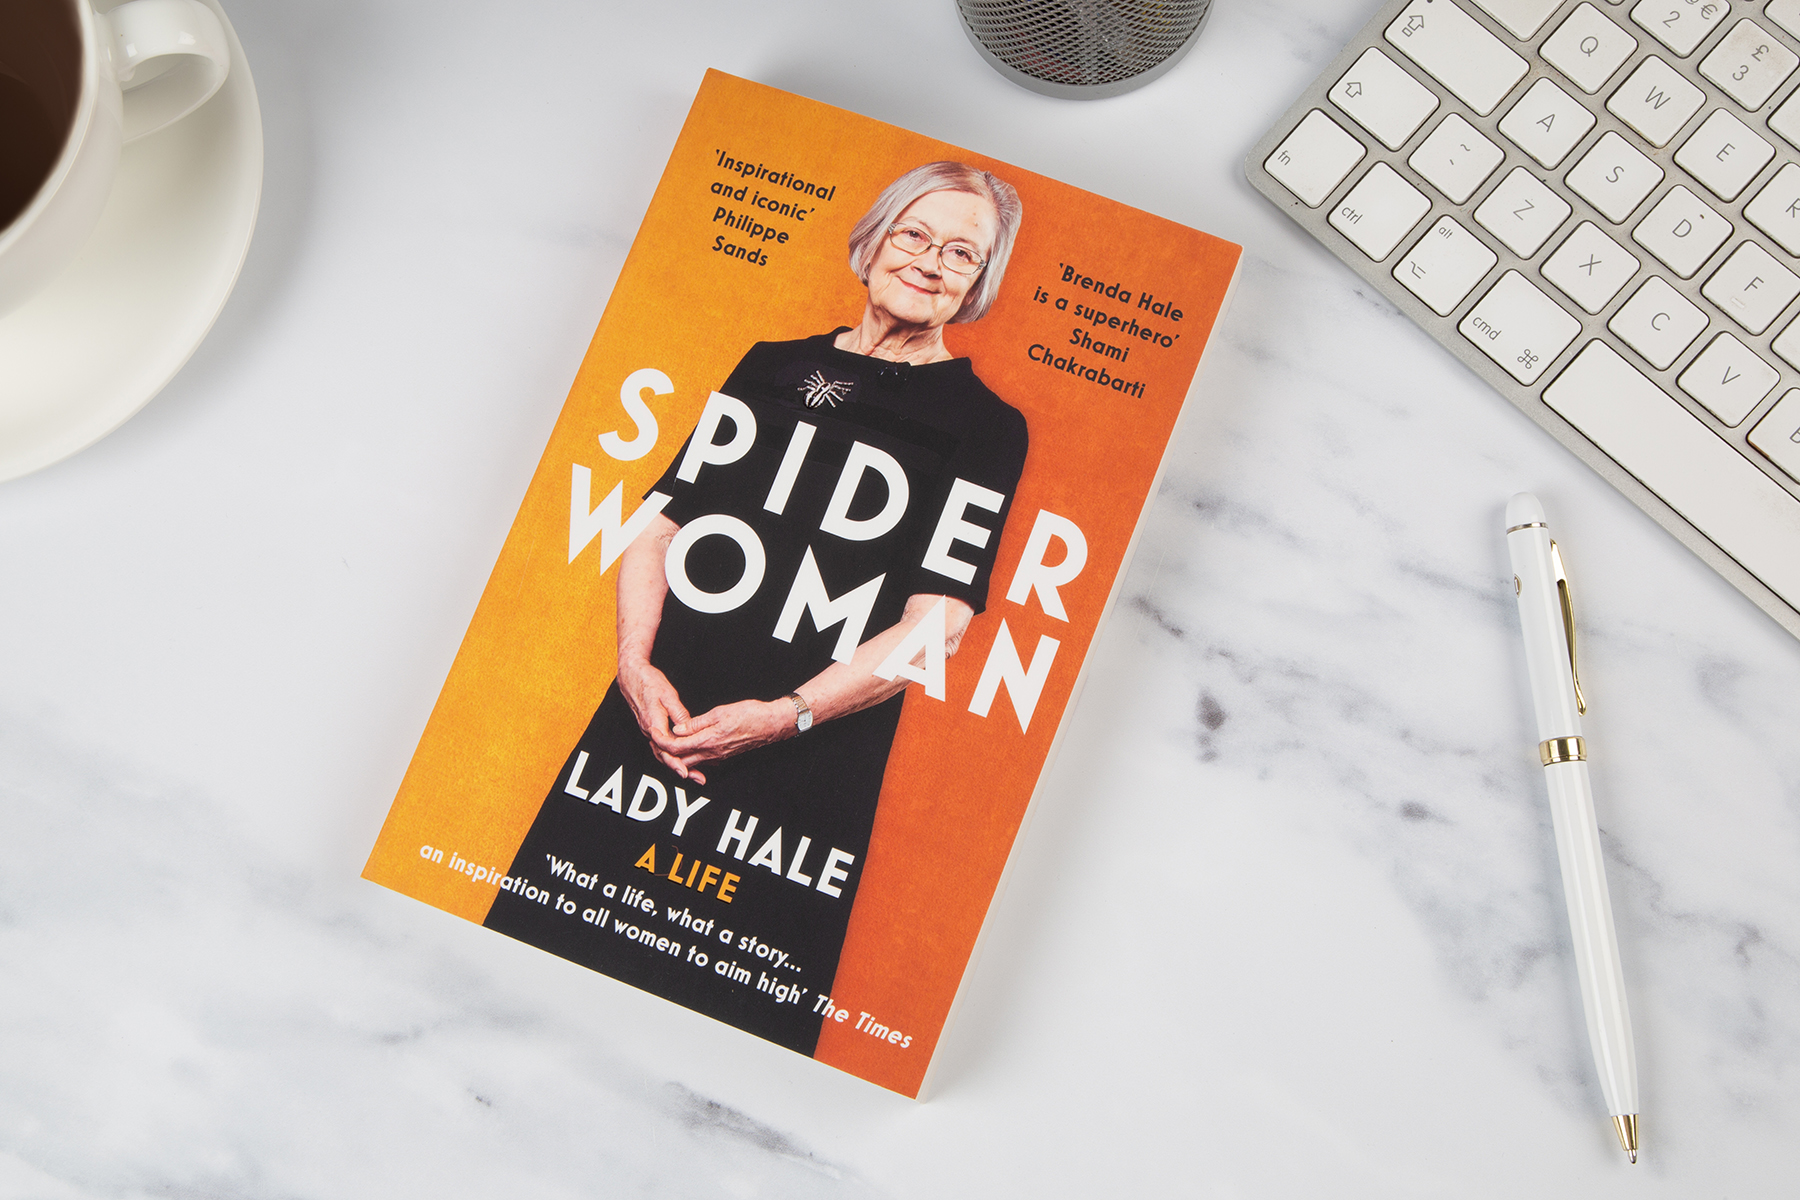 Book, Spider Woman by Lady Hale, on a marble table top, surrounded by a computer keyboard, biro pen and cup of coffee.